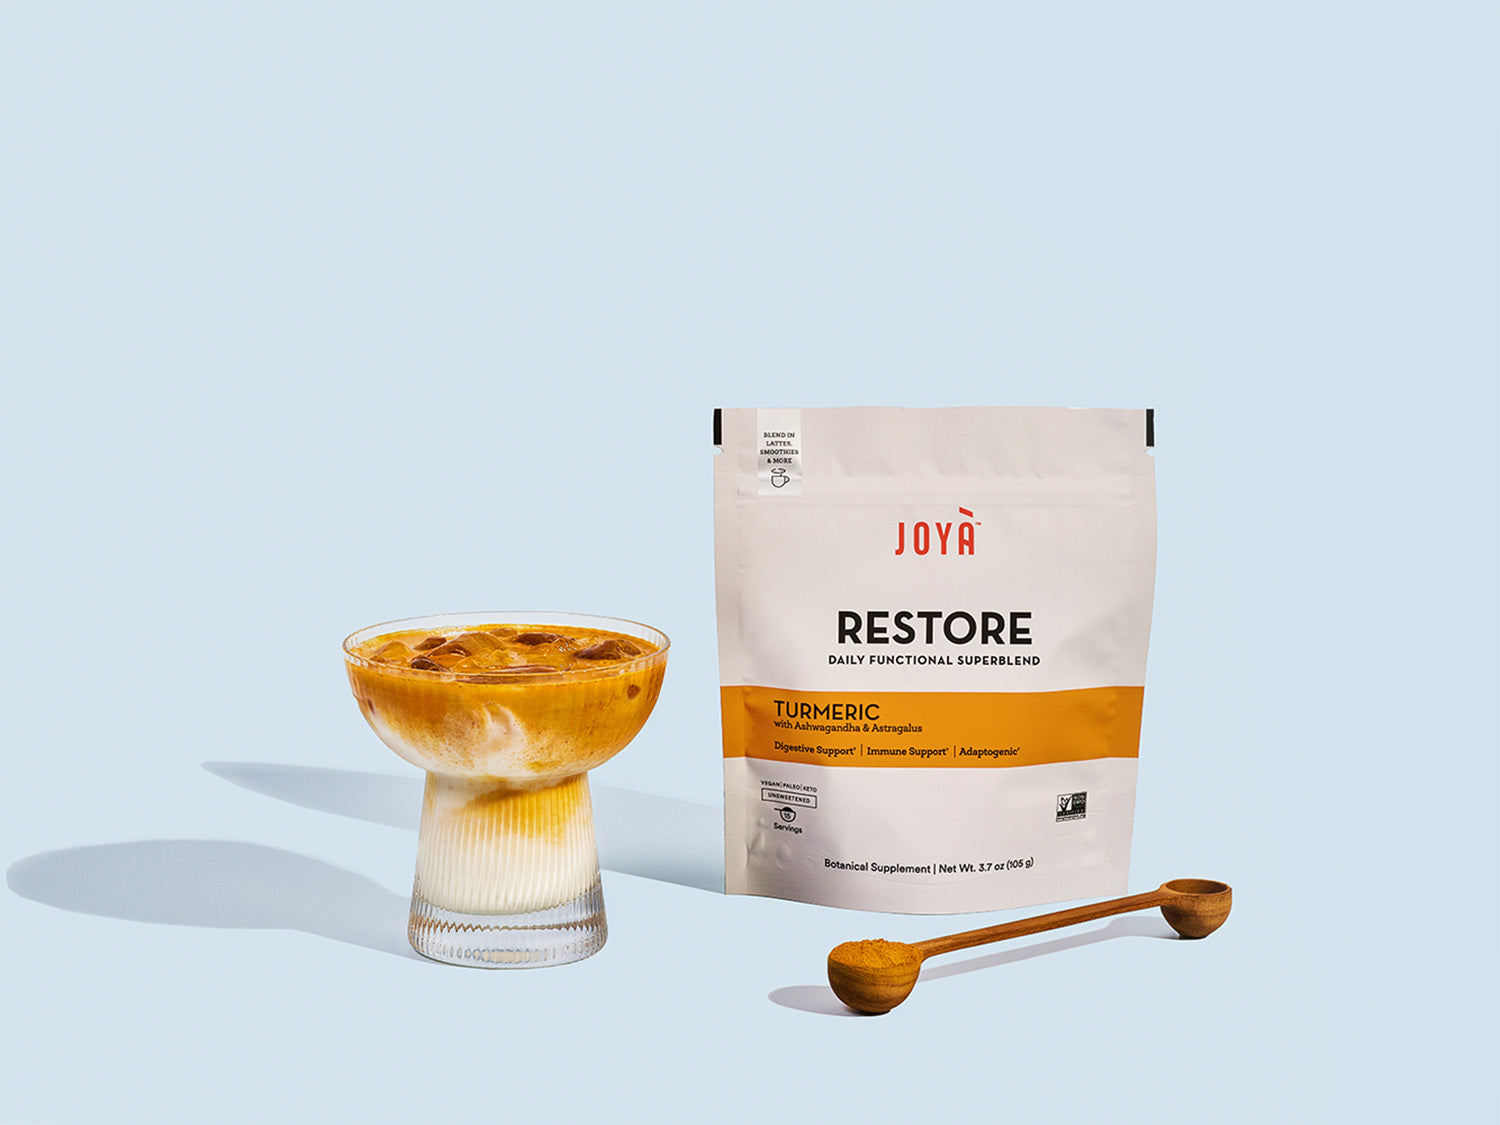 Restore Superblend 15-serving pouch sitting beside a wooden spoon and iced Restore turmeric latte in a clear glass on a blue background